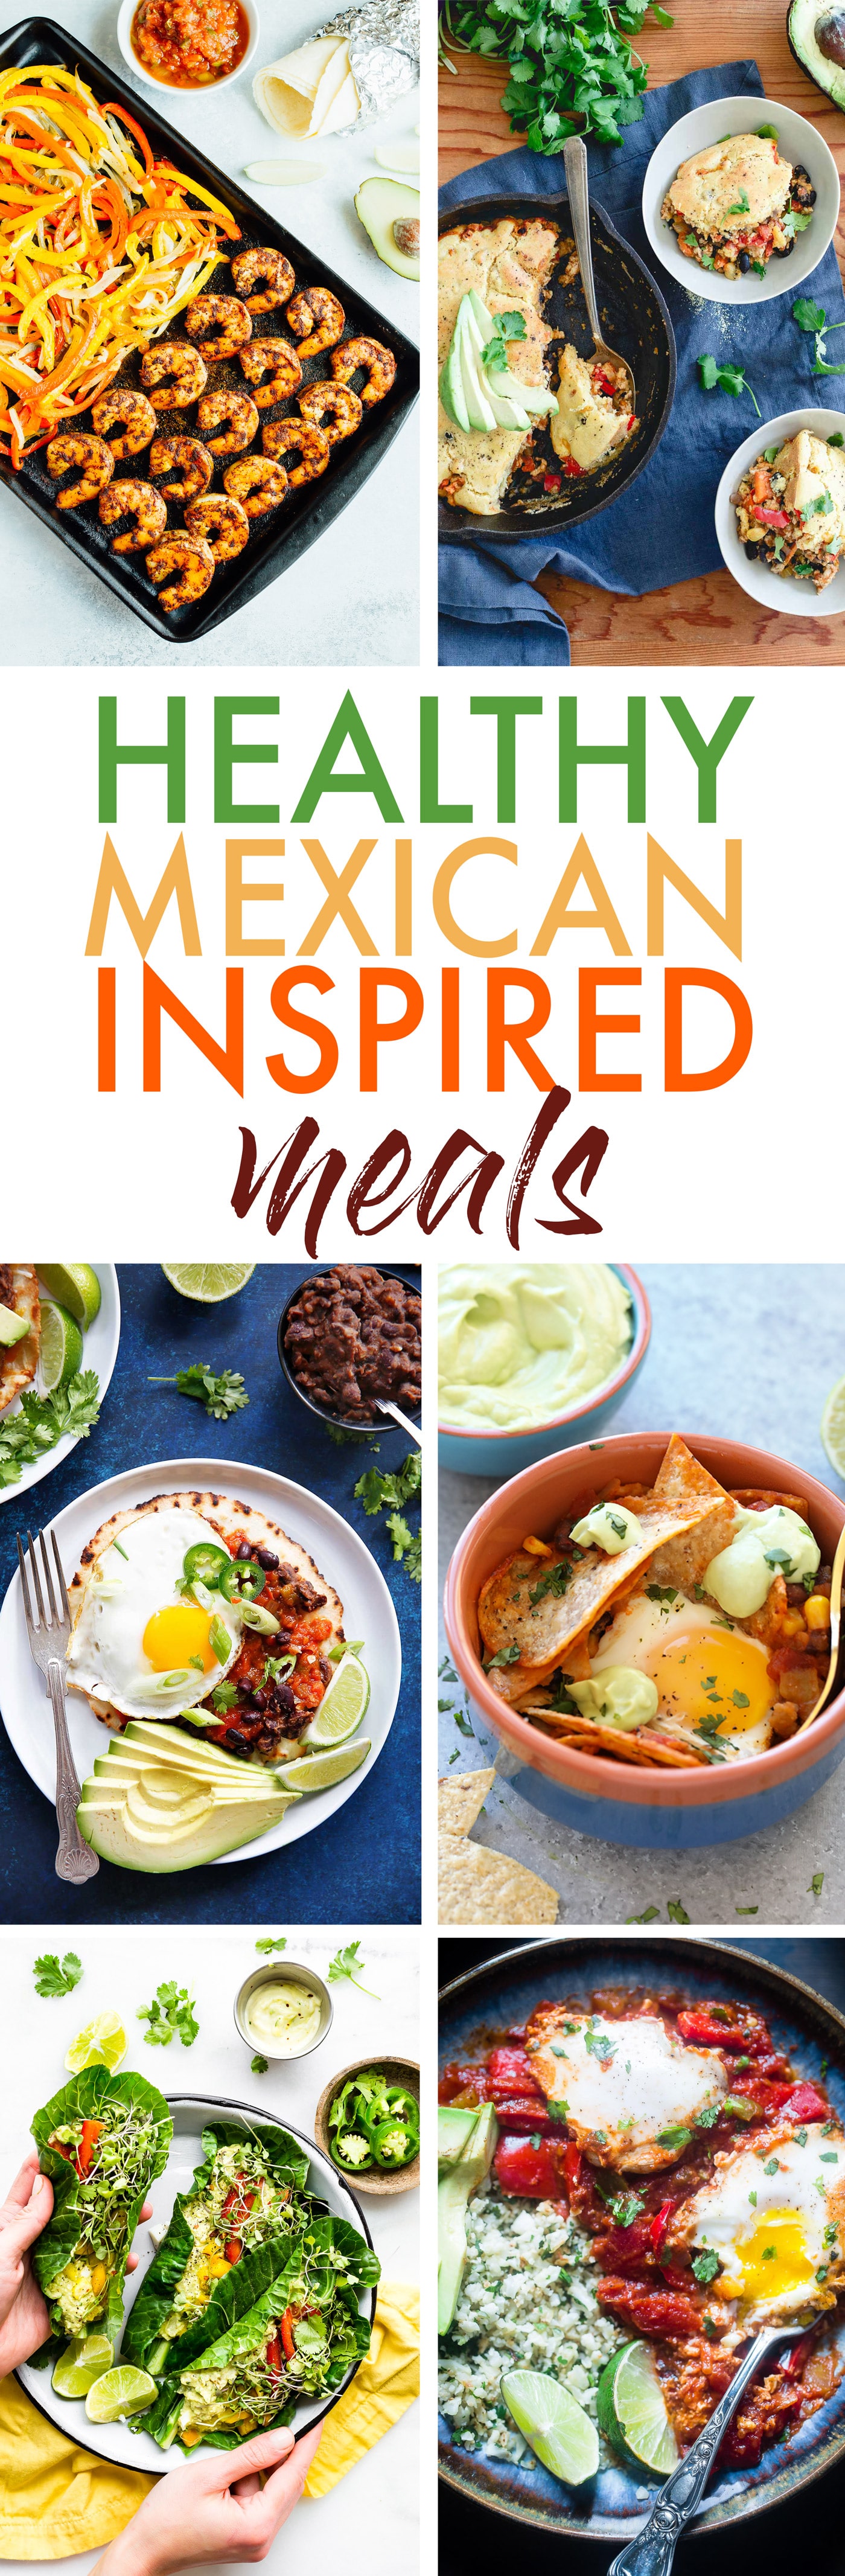 Healthy Mexican Inspired Meals! Gluten free, Paleo options.